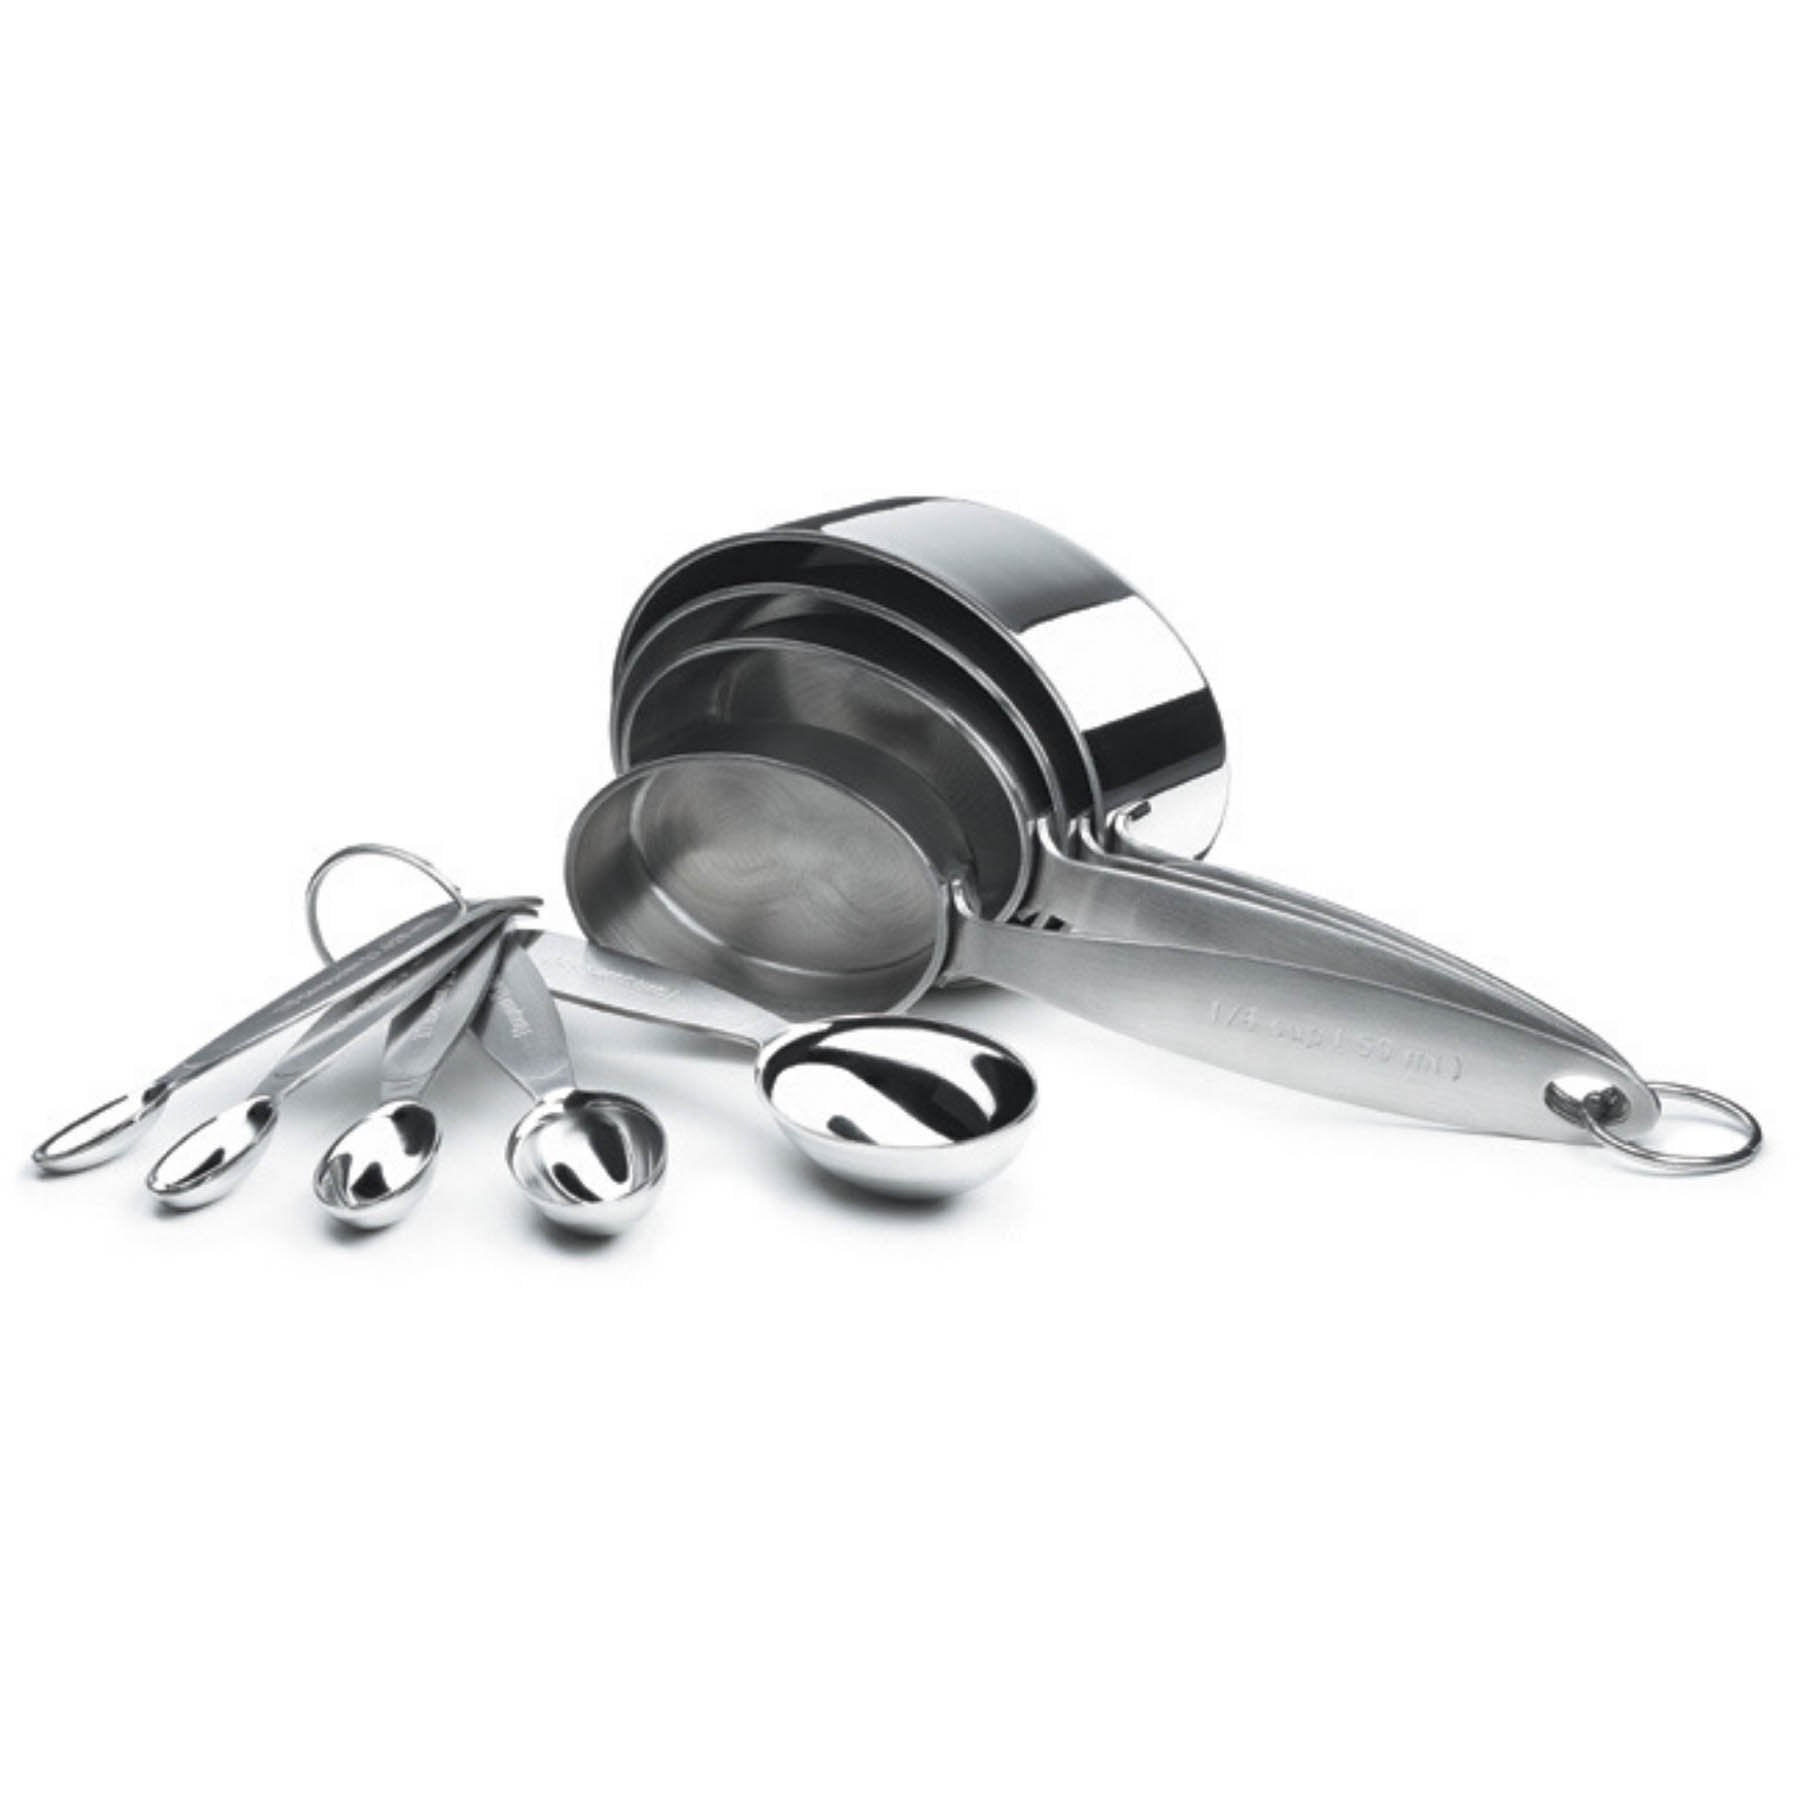 Professional Stainless Steel Cup And Spoon Set - Portable And